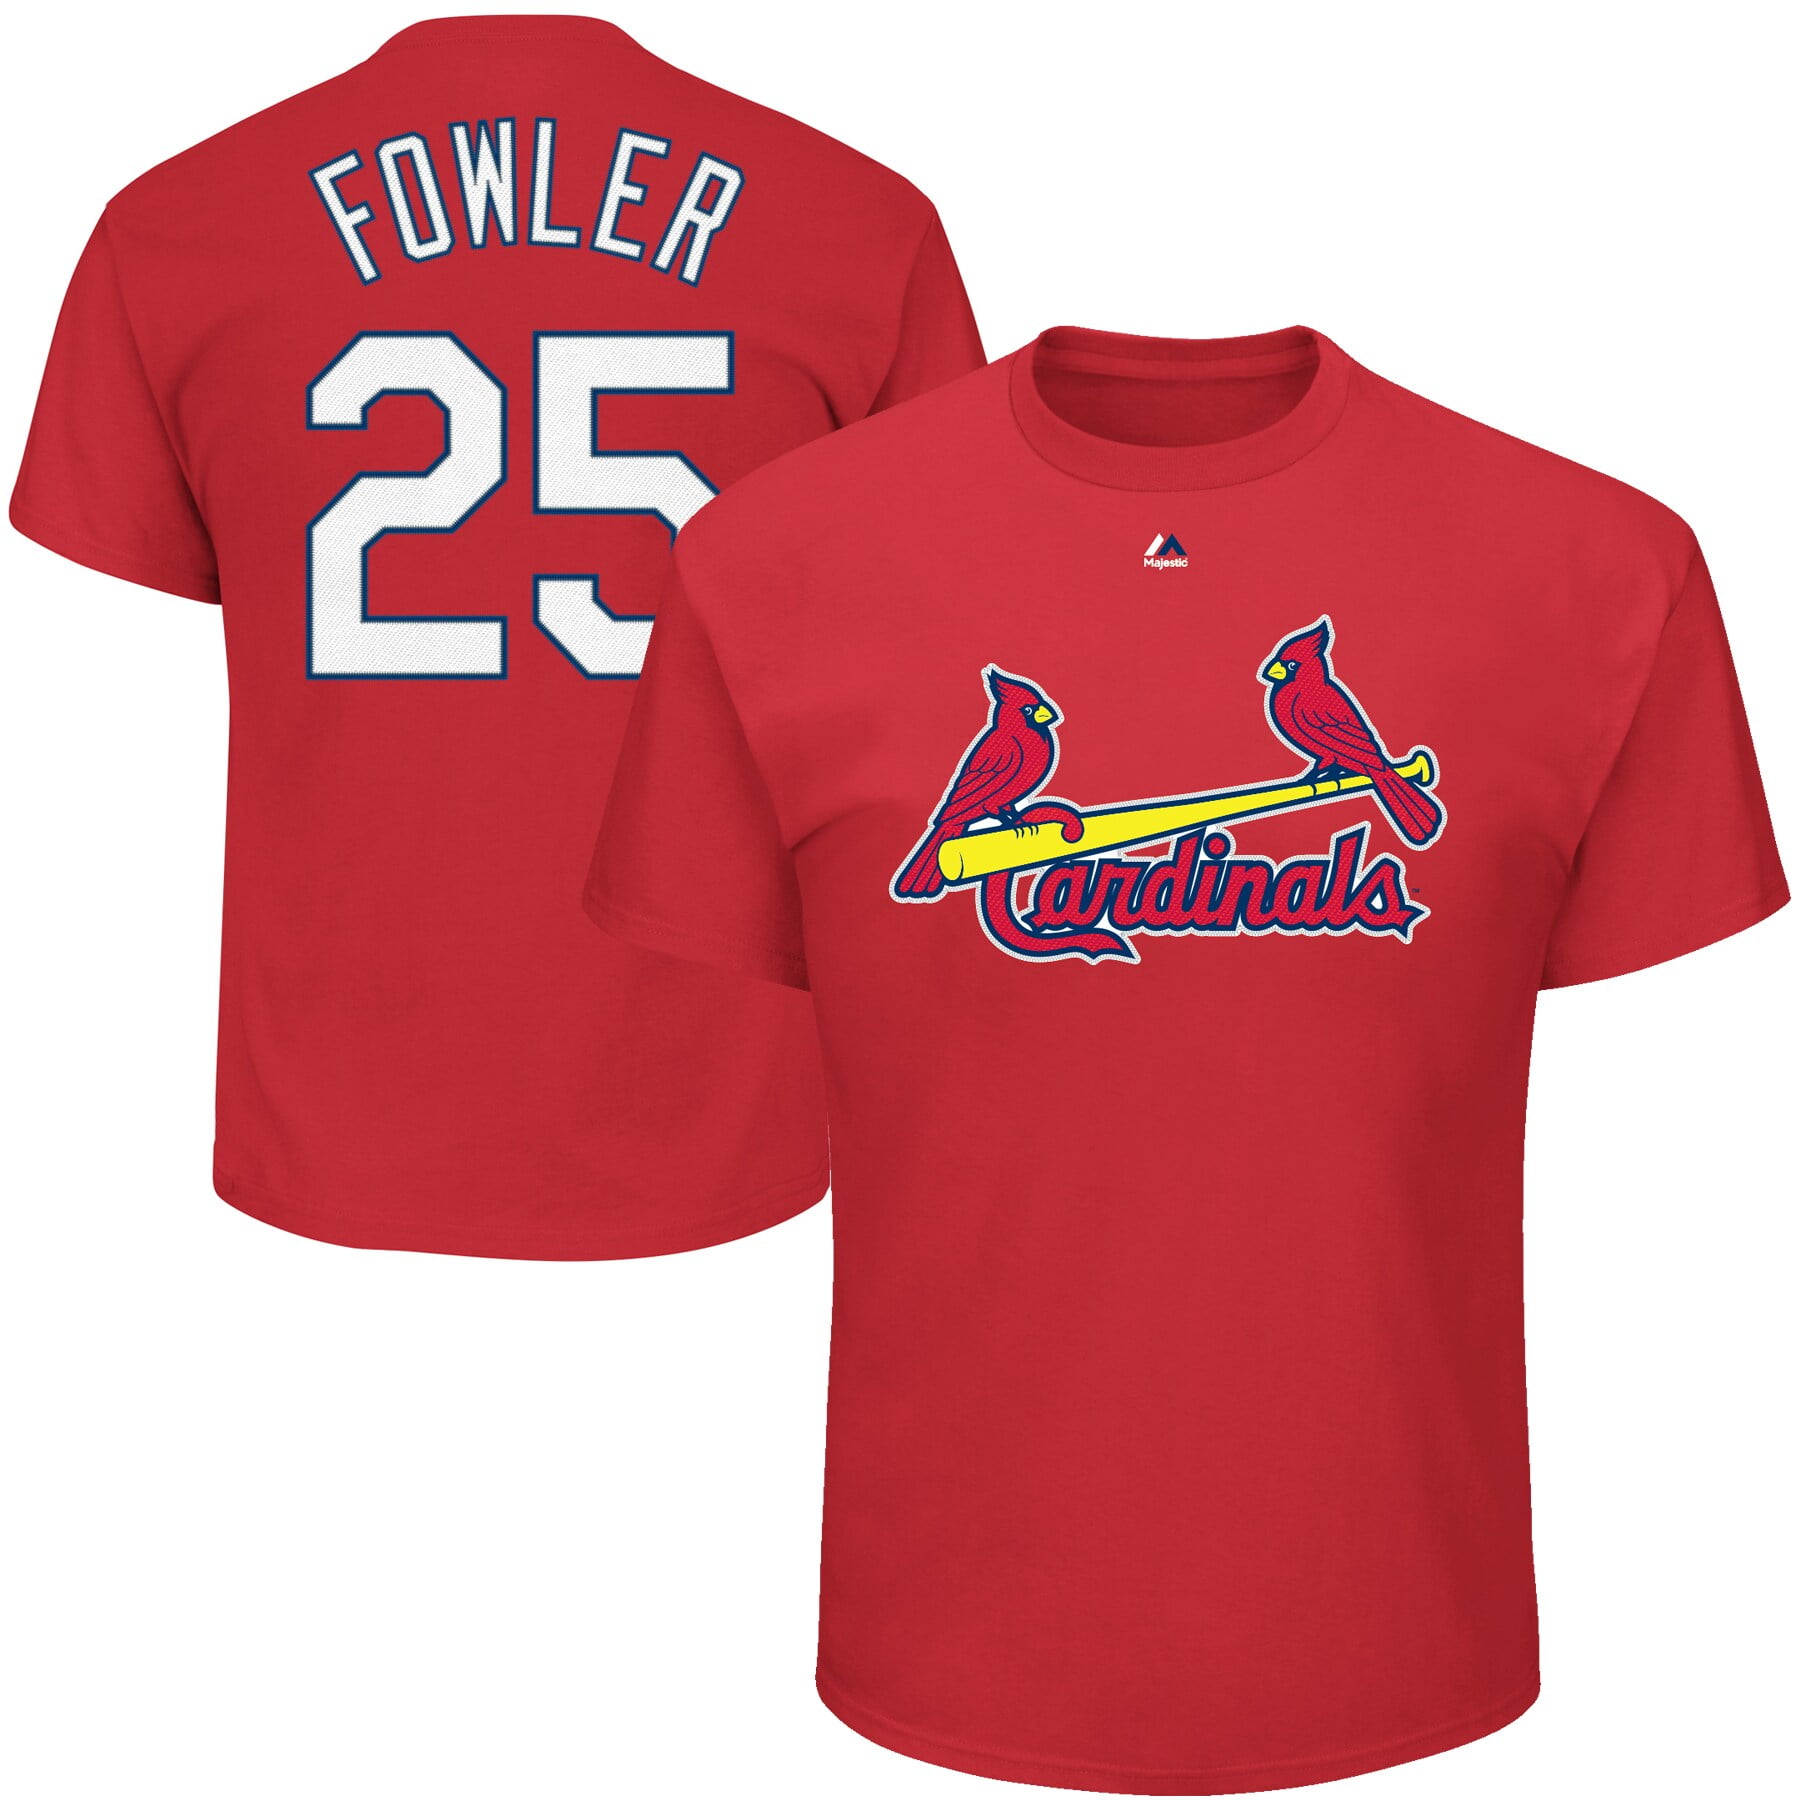 Dexter Fowler St. Louis Cardinals Majestic Name & Number T-Shirt - Red - 0 - 0